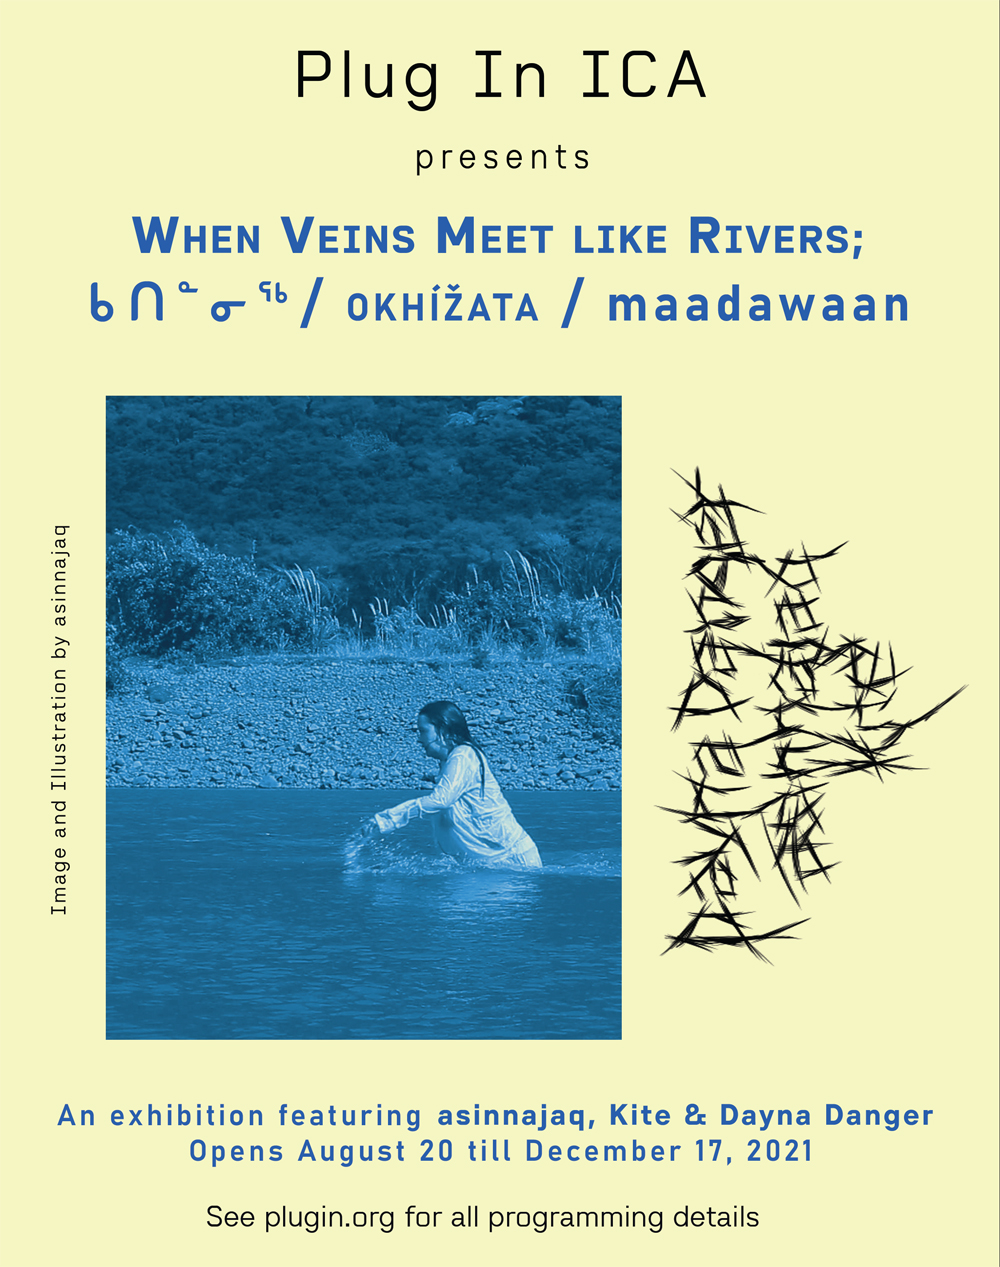 Poster with blue text on light yellow background with images showing a woman wading hip depth through a river and stylized text listing the artists "Dayna Danger, asinnajaq, Kite"